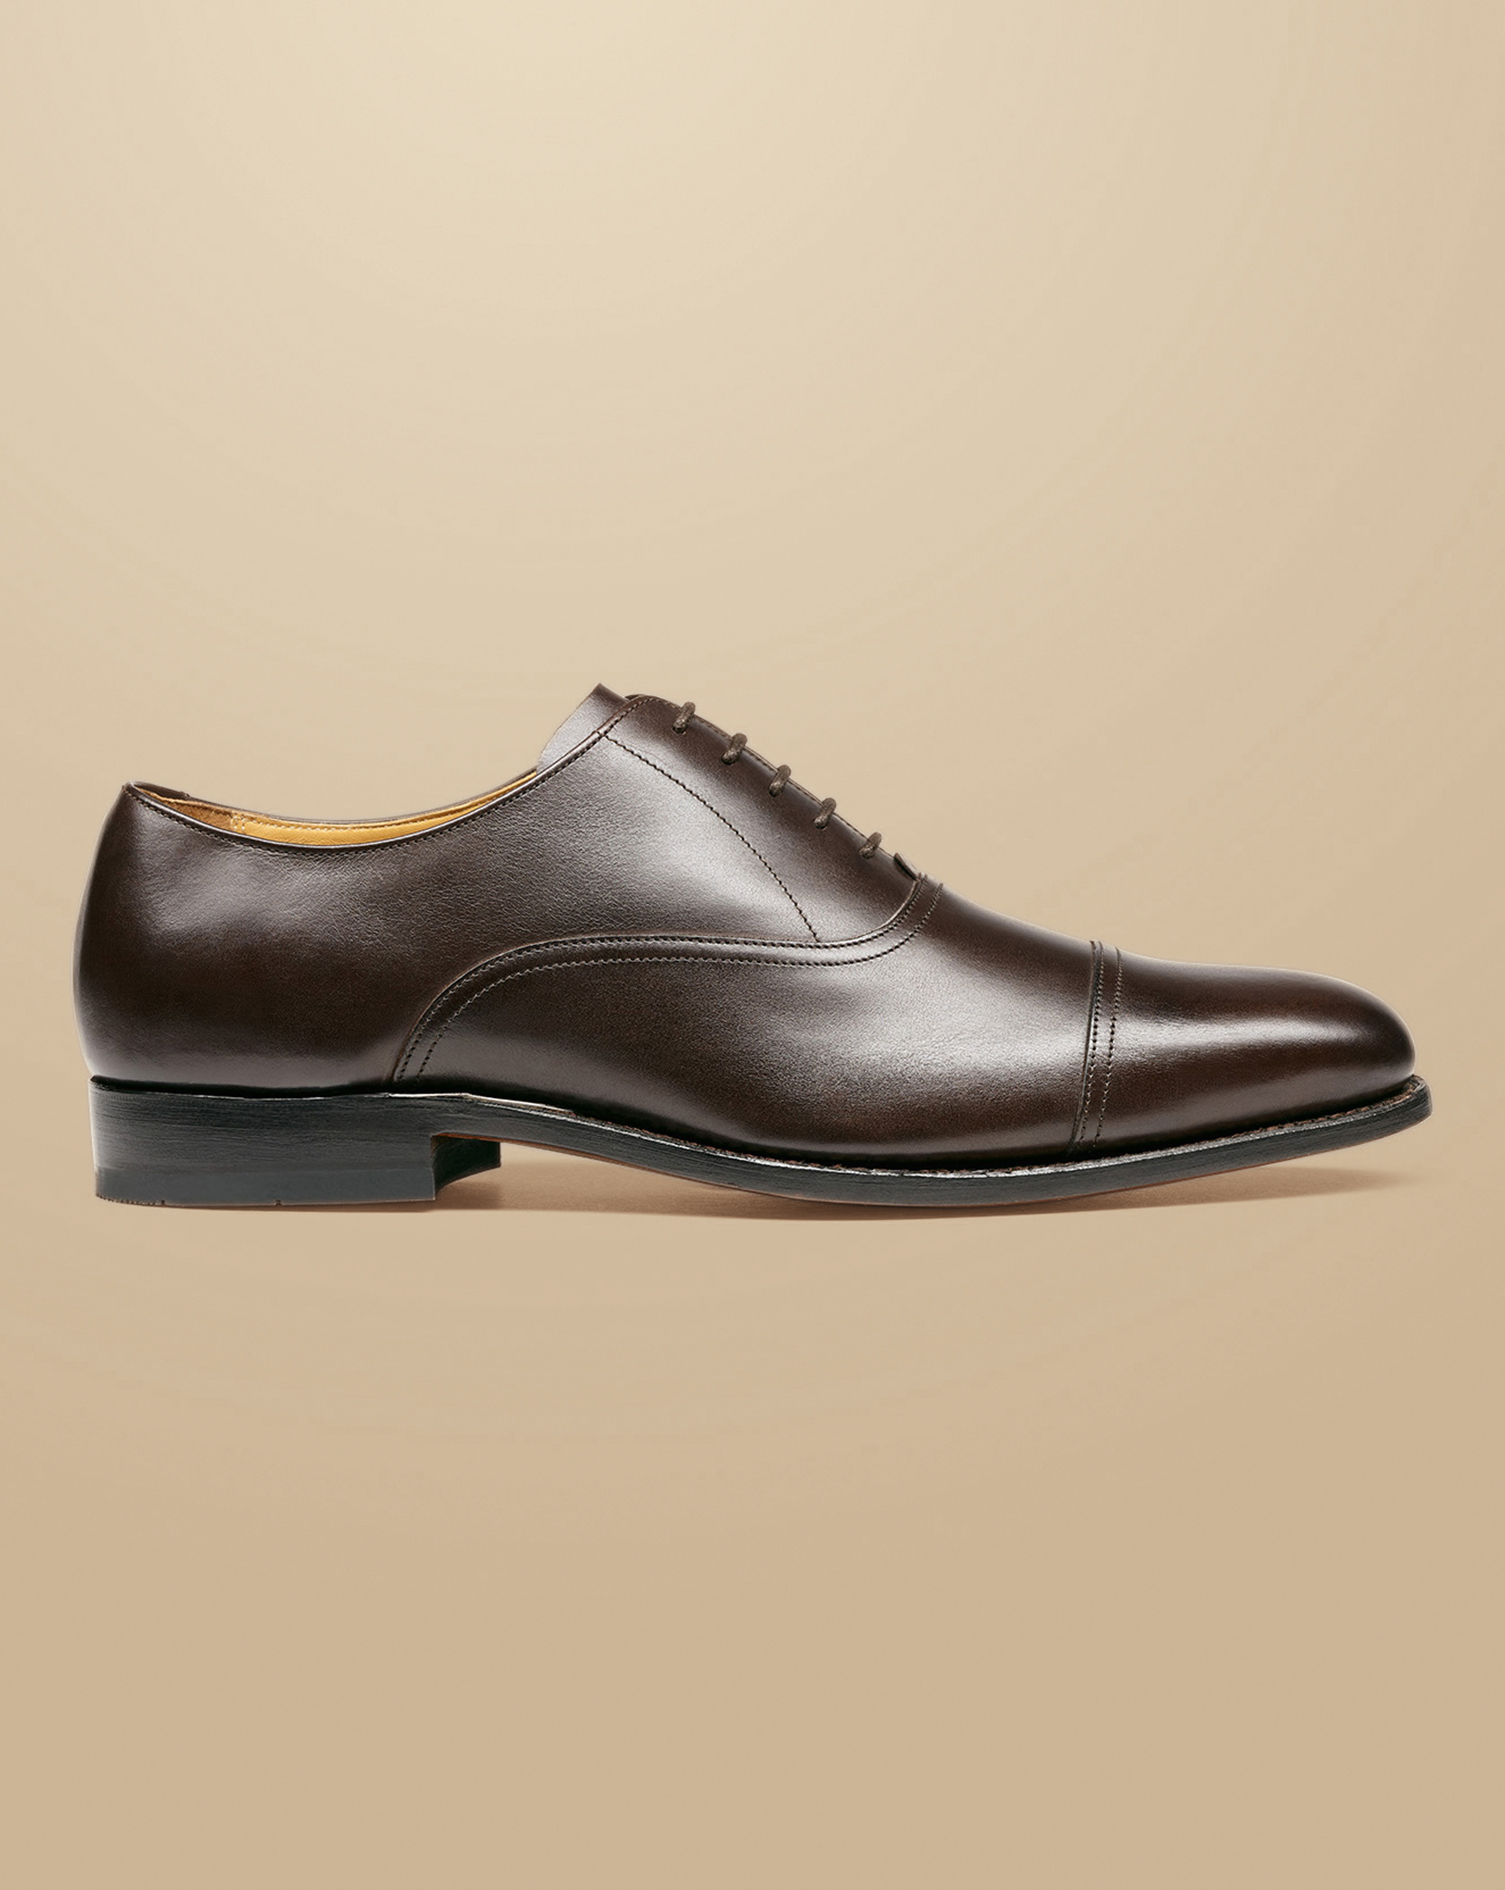 Leather Oxford Shoes - Dark Chocolate Size 10.5
